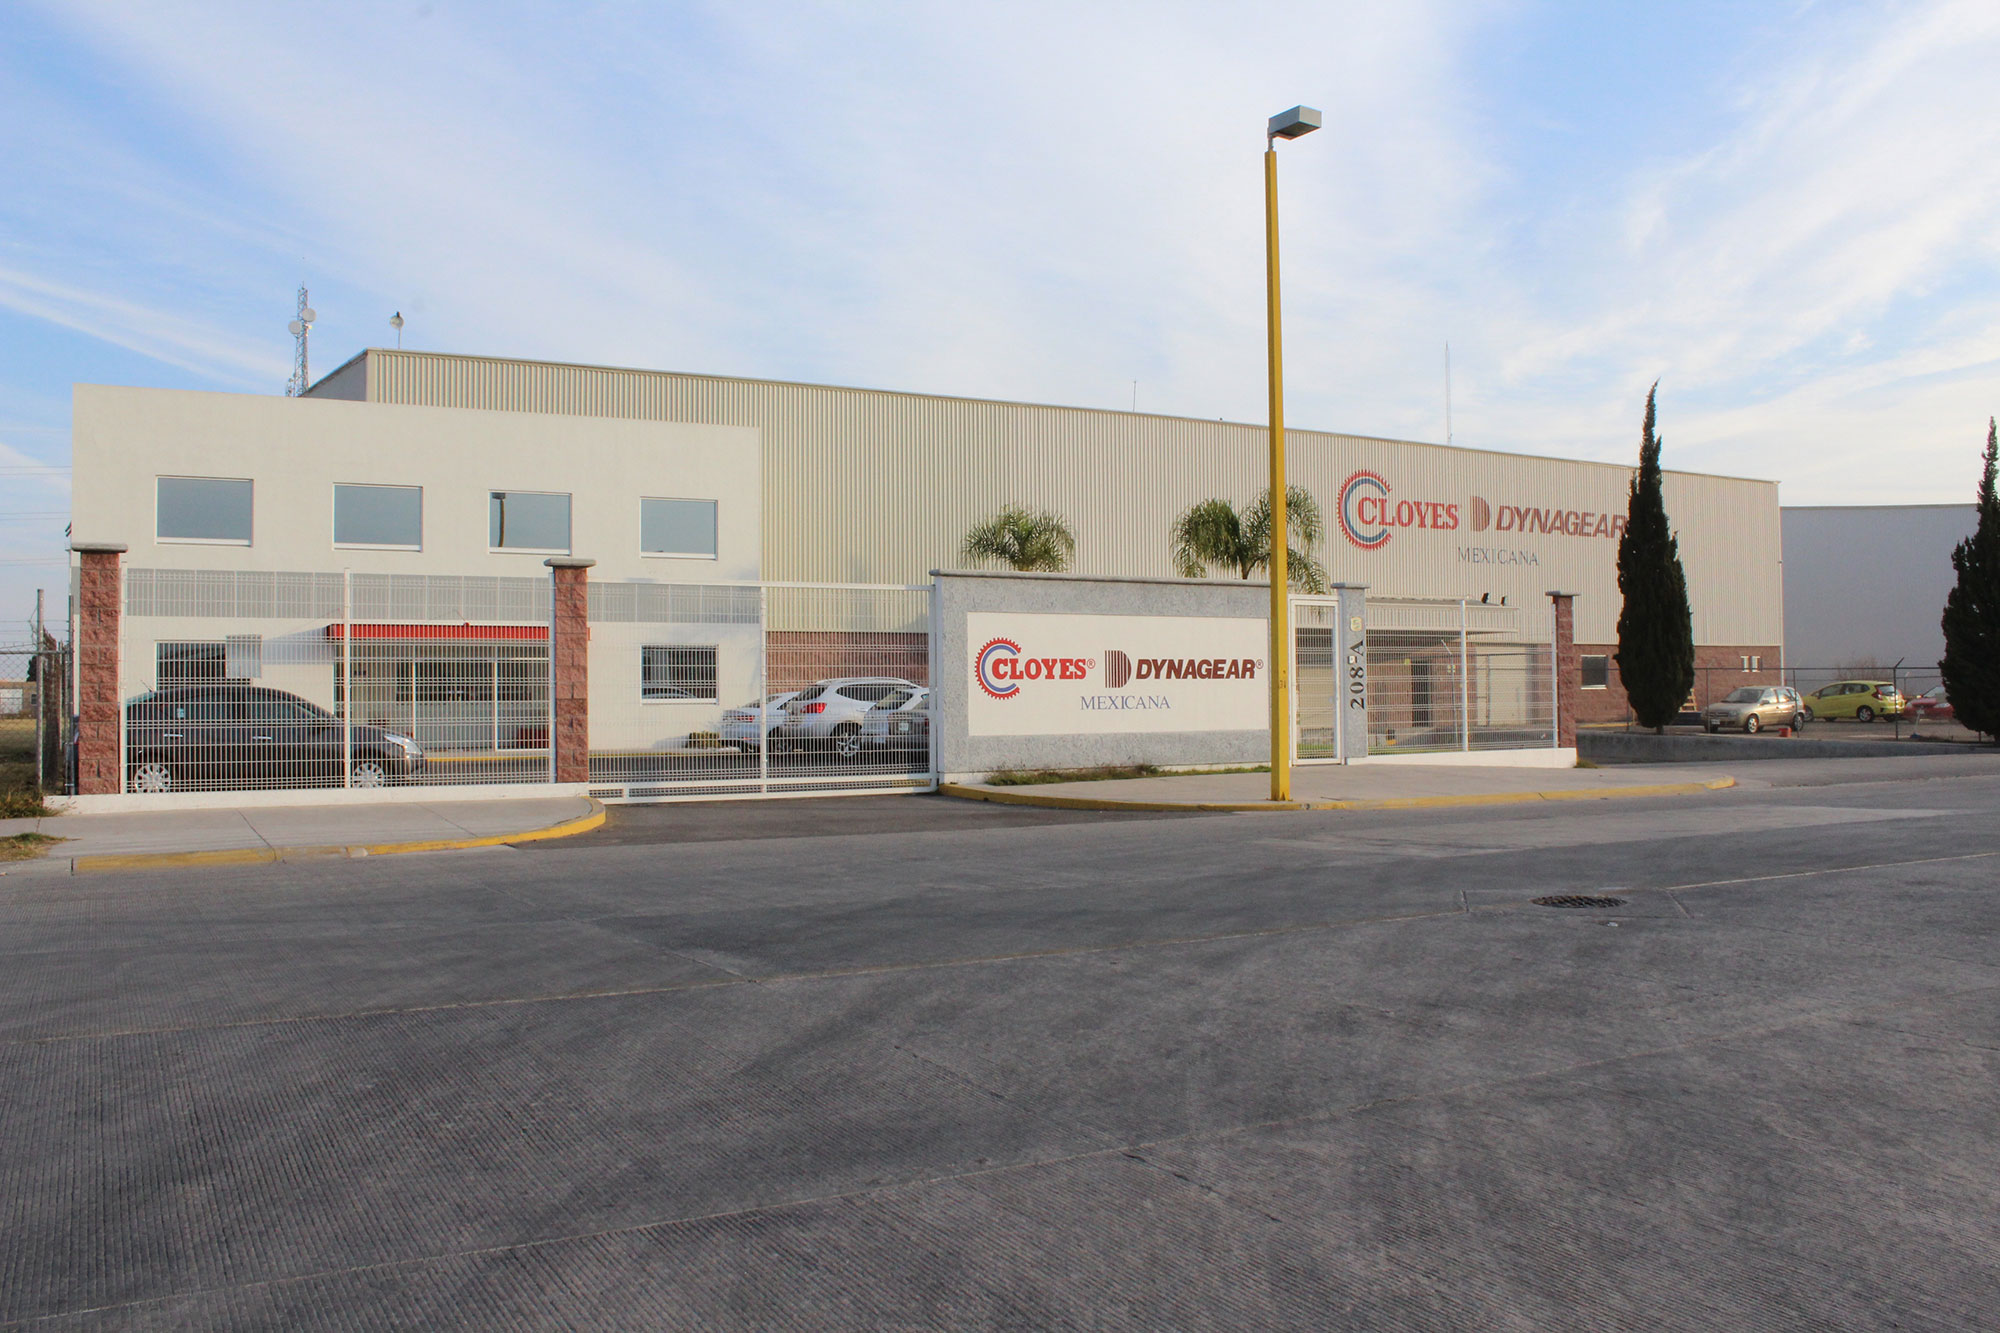 Cloyes Expands Distribution Center in Mexico